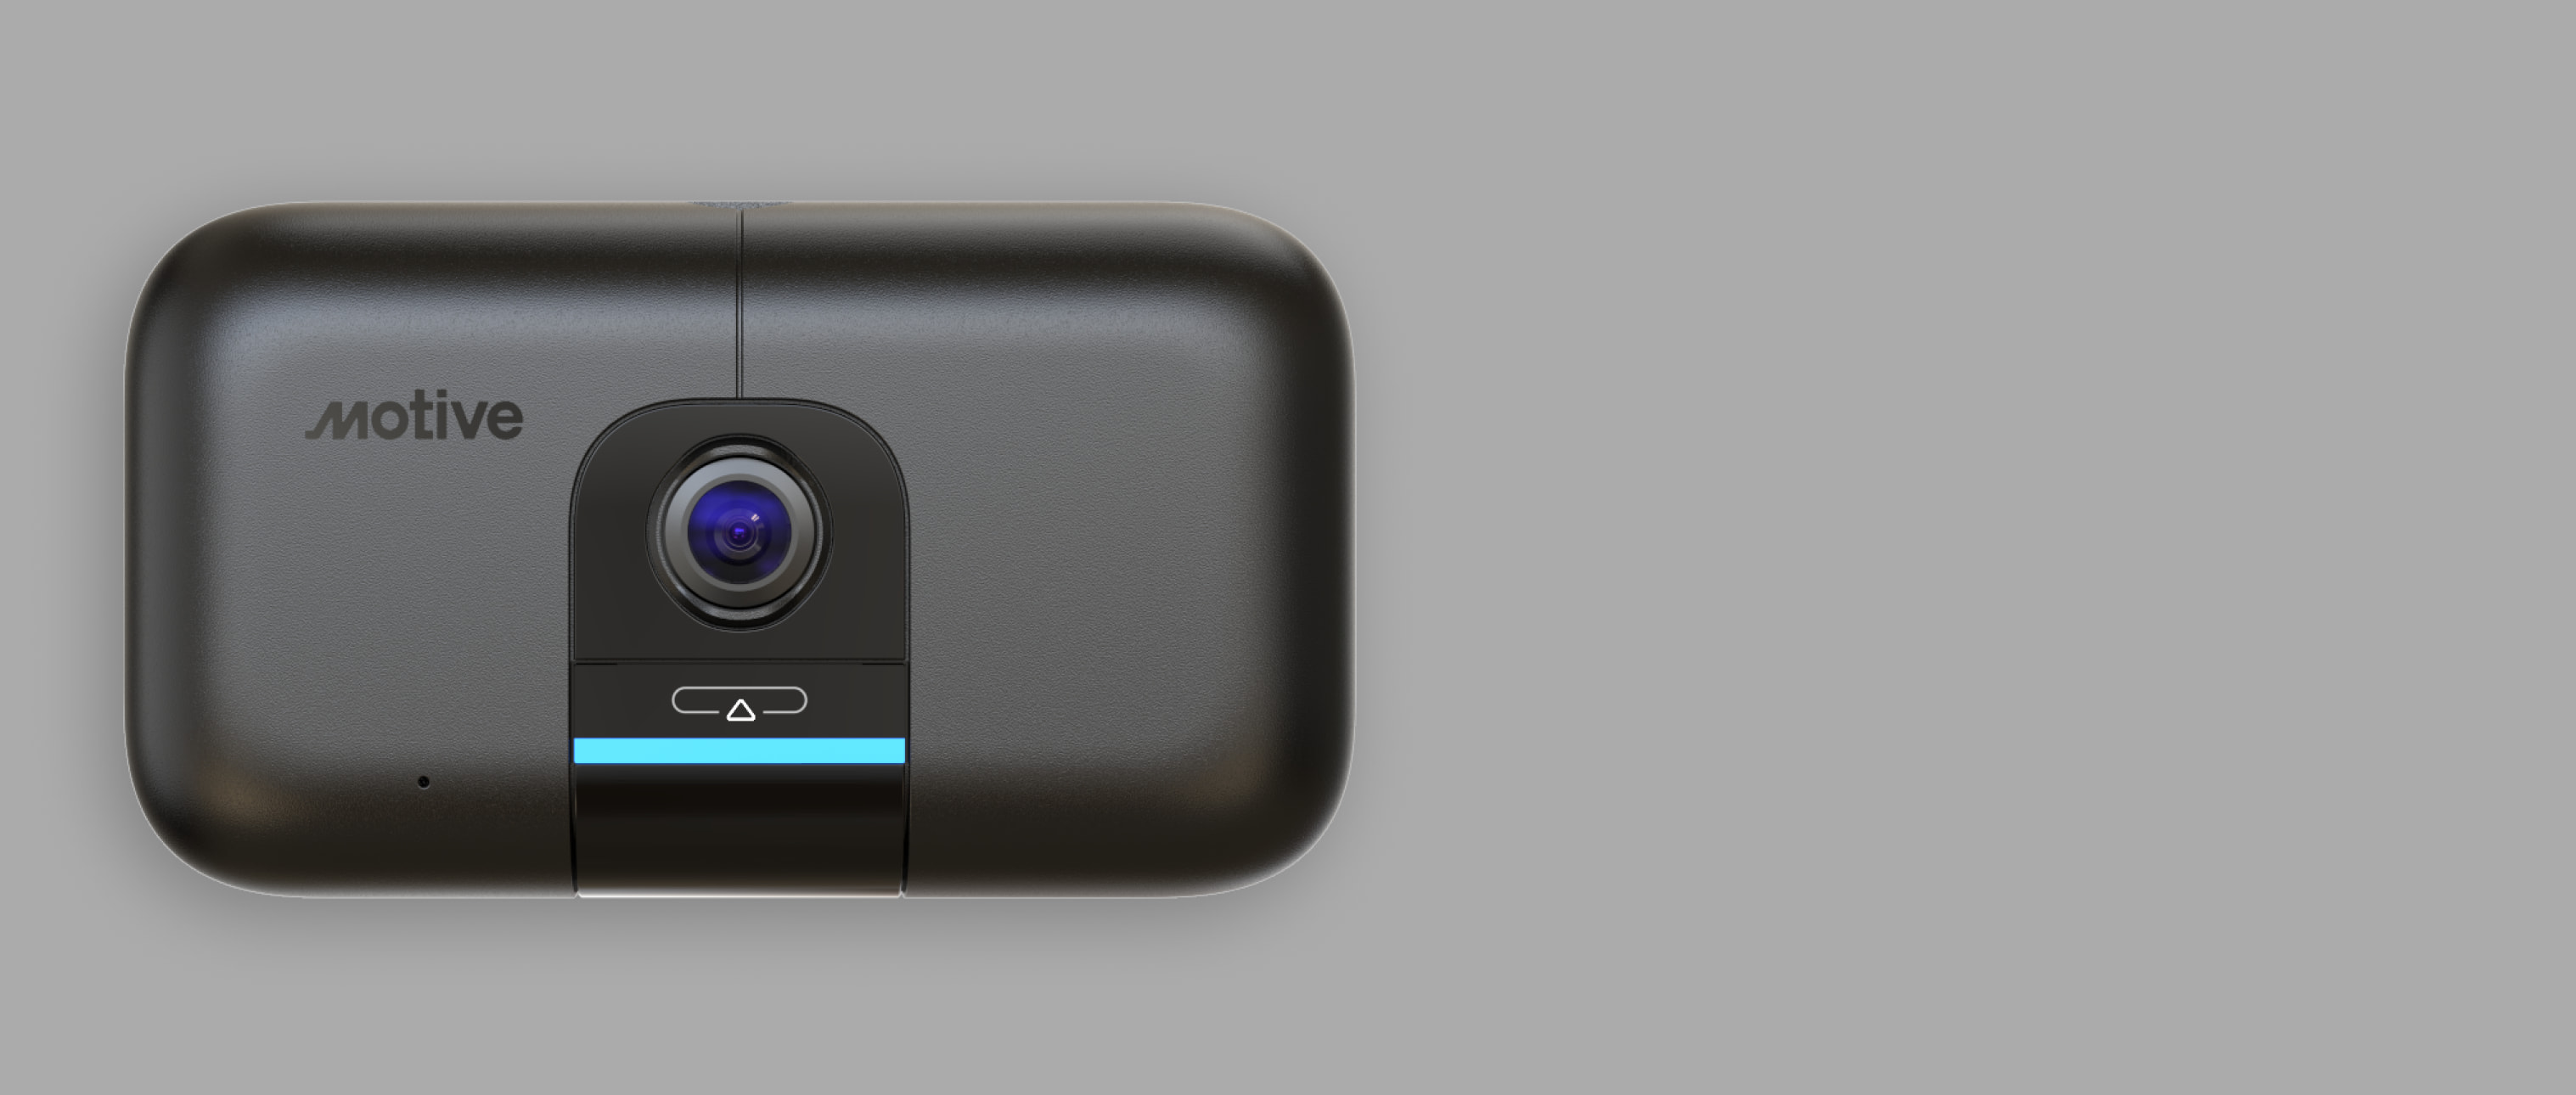 Why Should Every Truck Driver Install a Dash Camera?